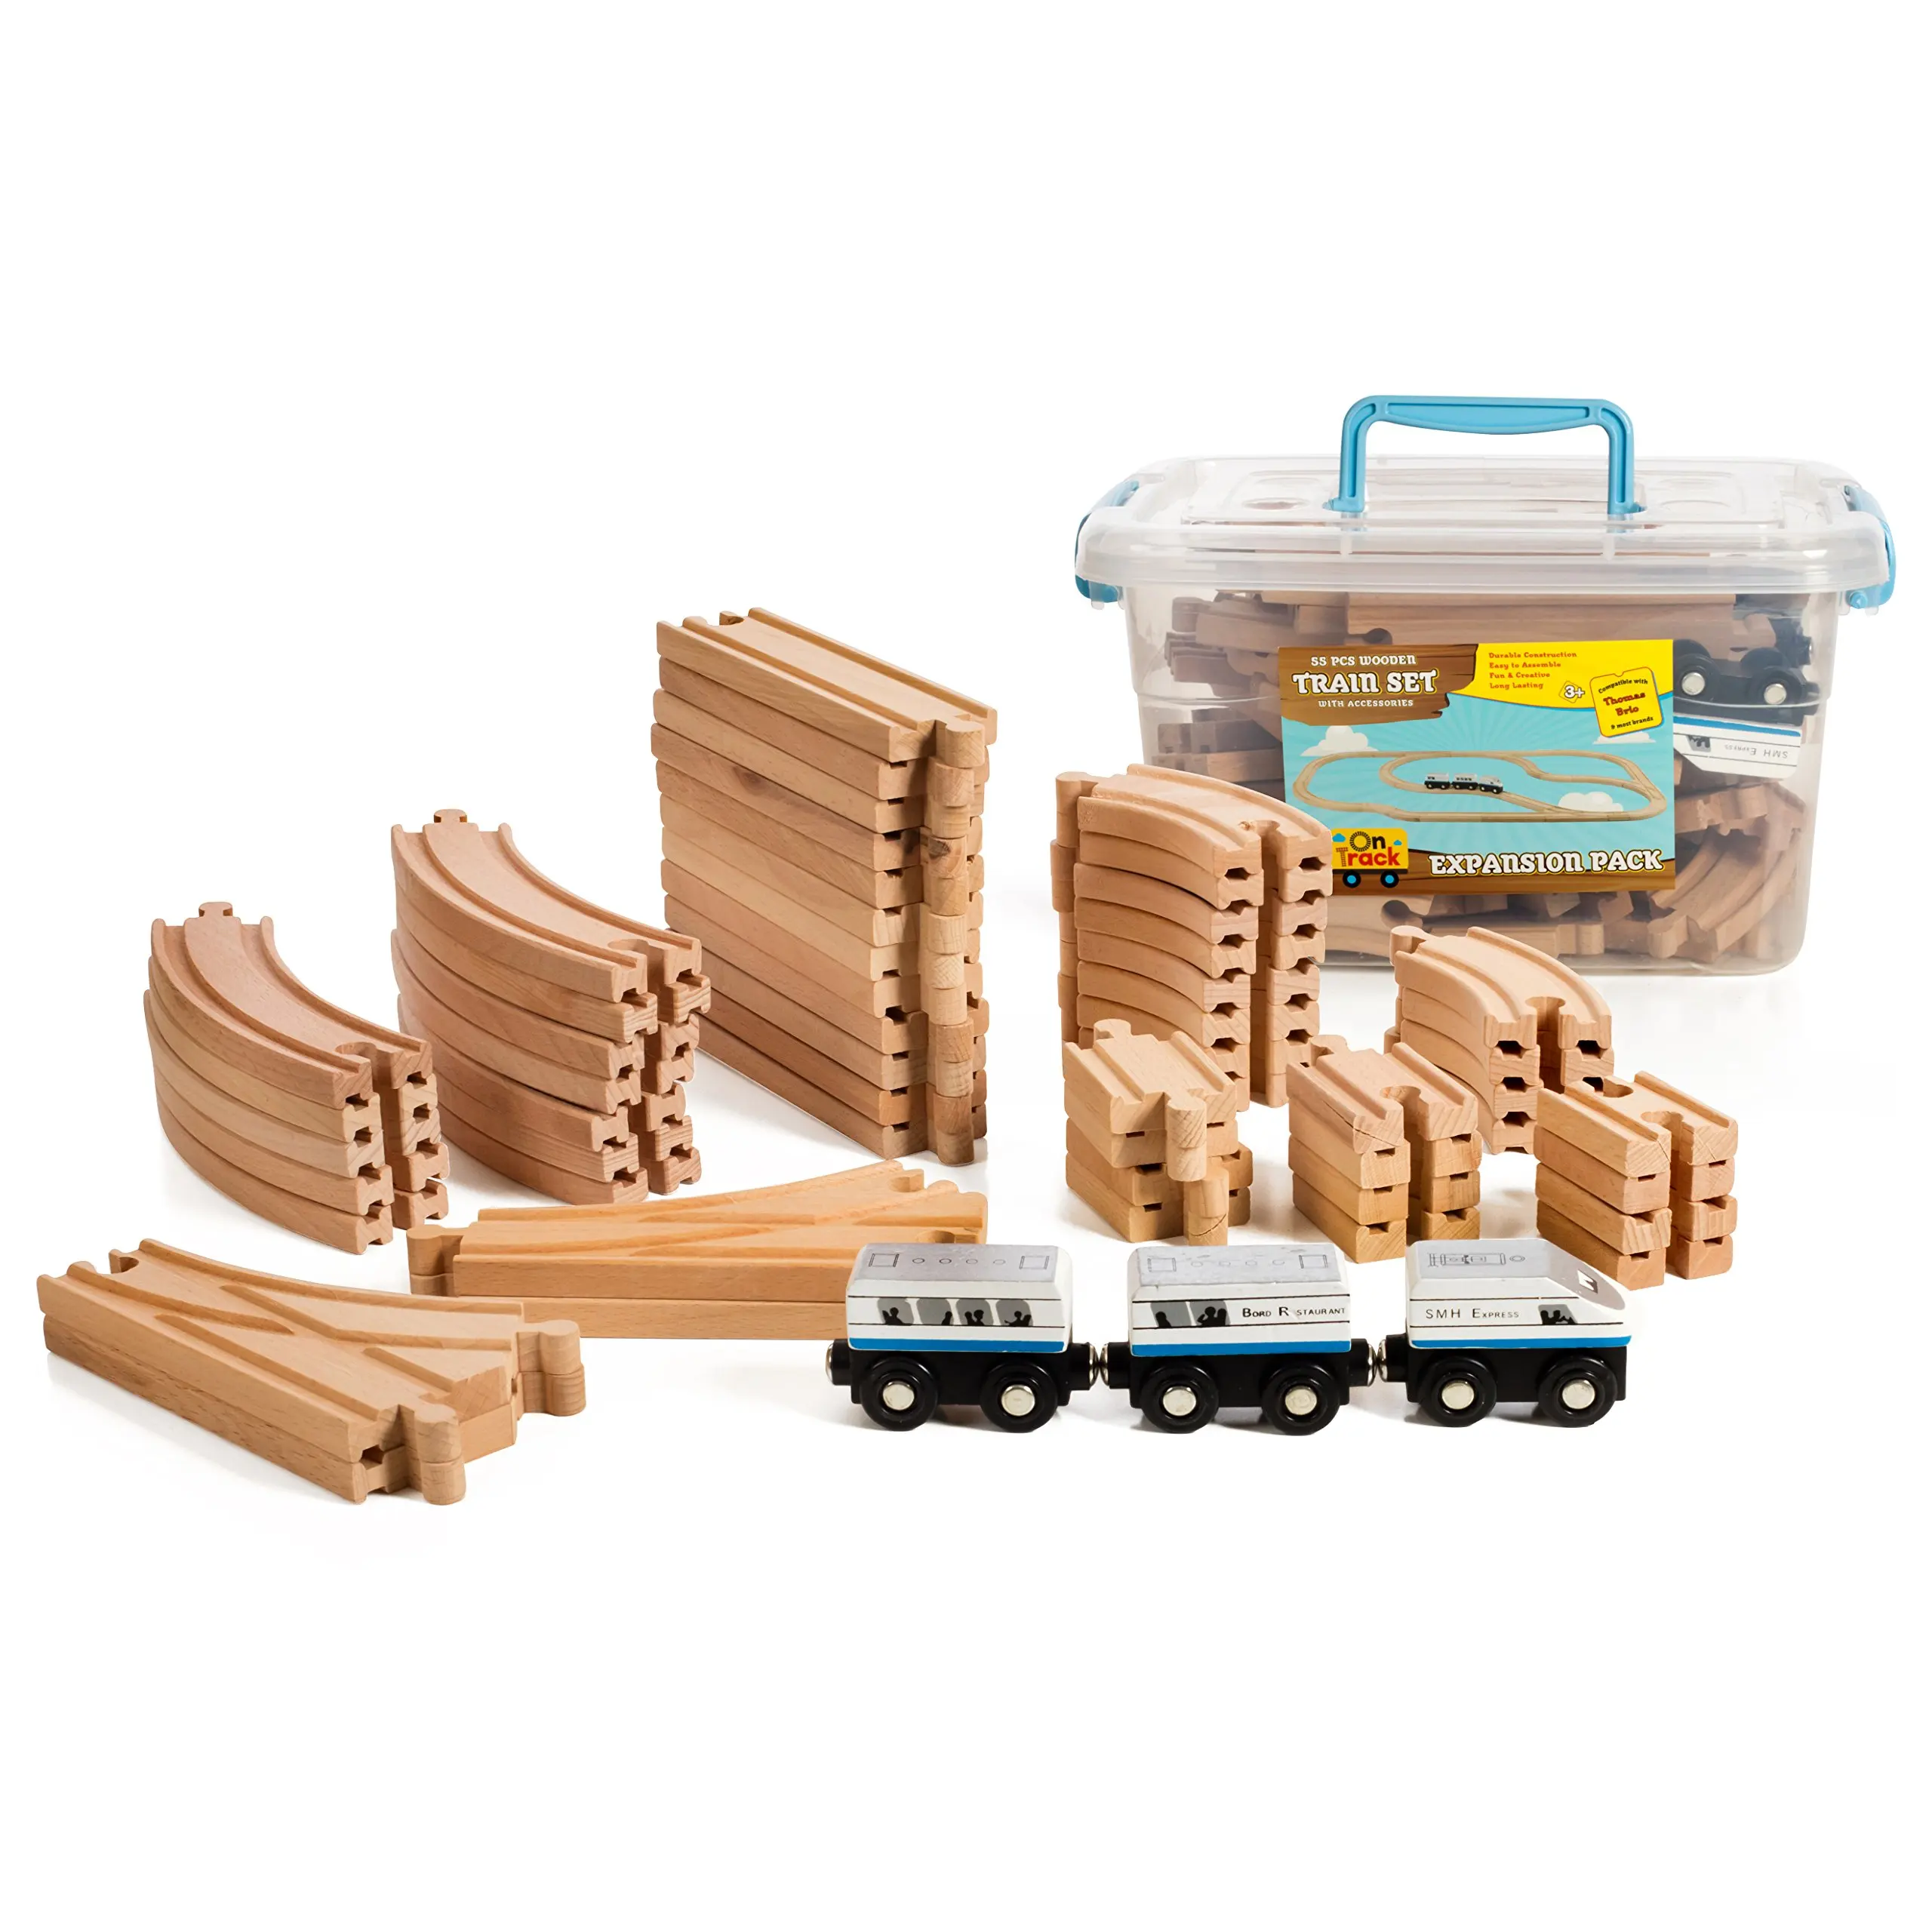 Cars Tracks Trains Trees Early Learning Toys for Kids 24-piece Small ActiviKid Wooden Train Set Signs Buildings Colorful City with Caboose Includes Storage Container Mi Toys Tracks